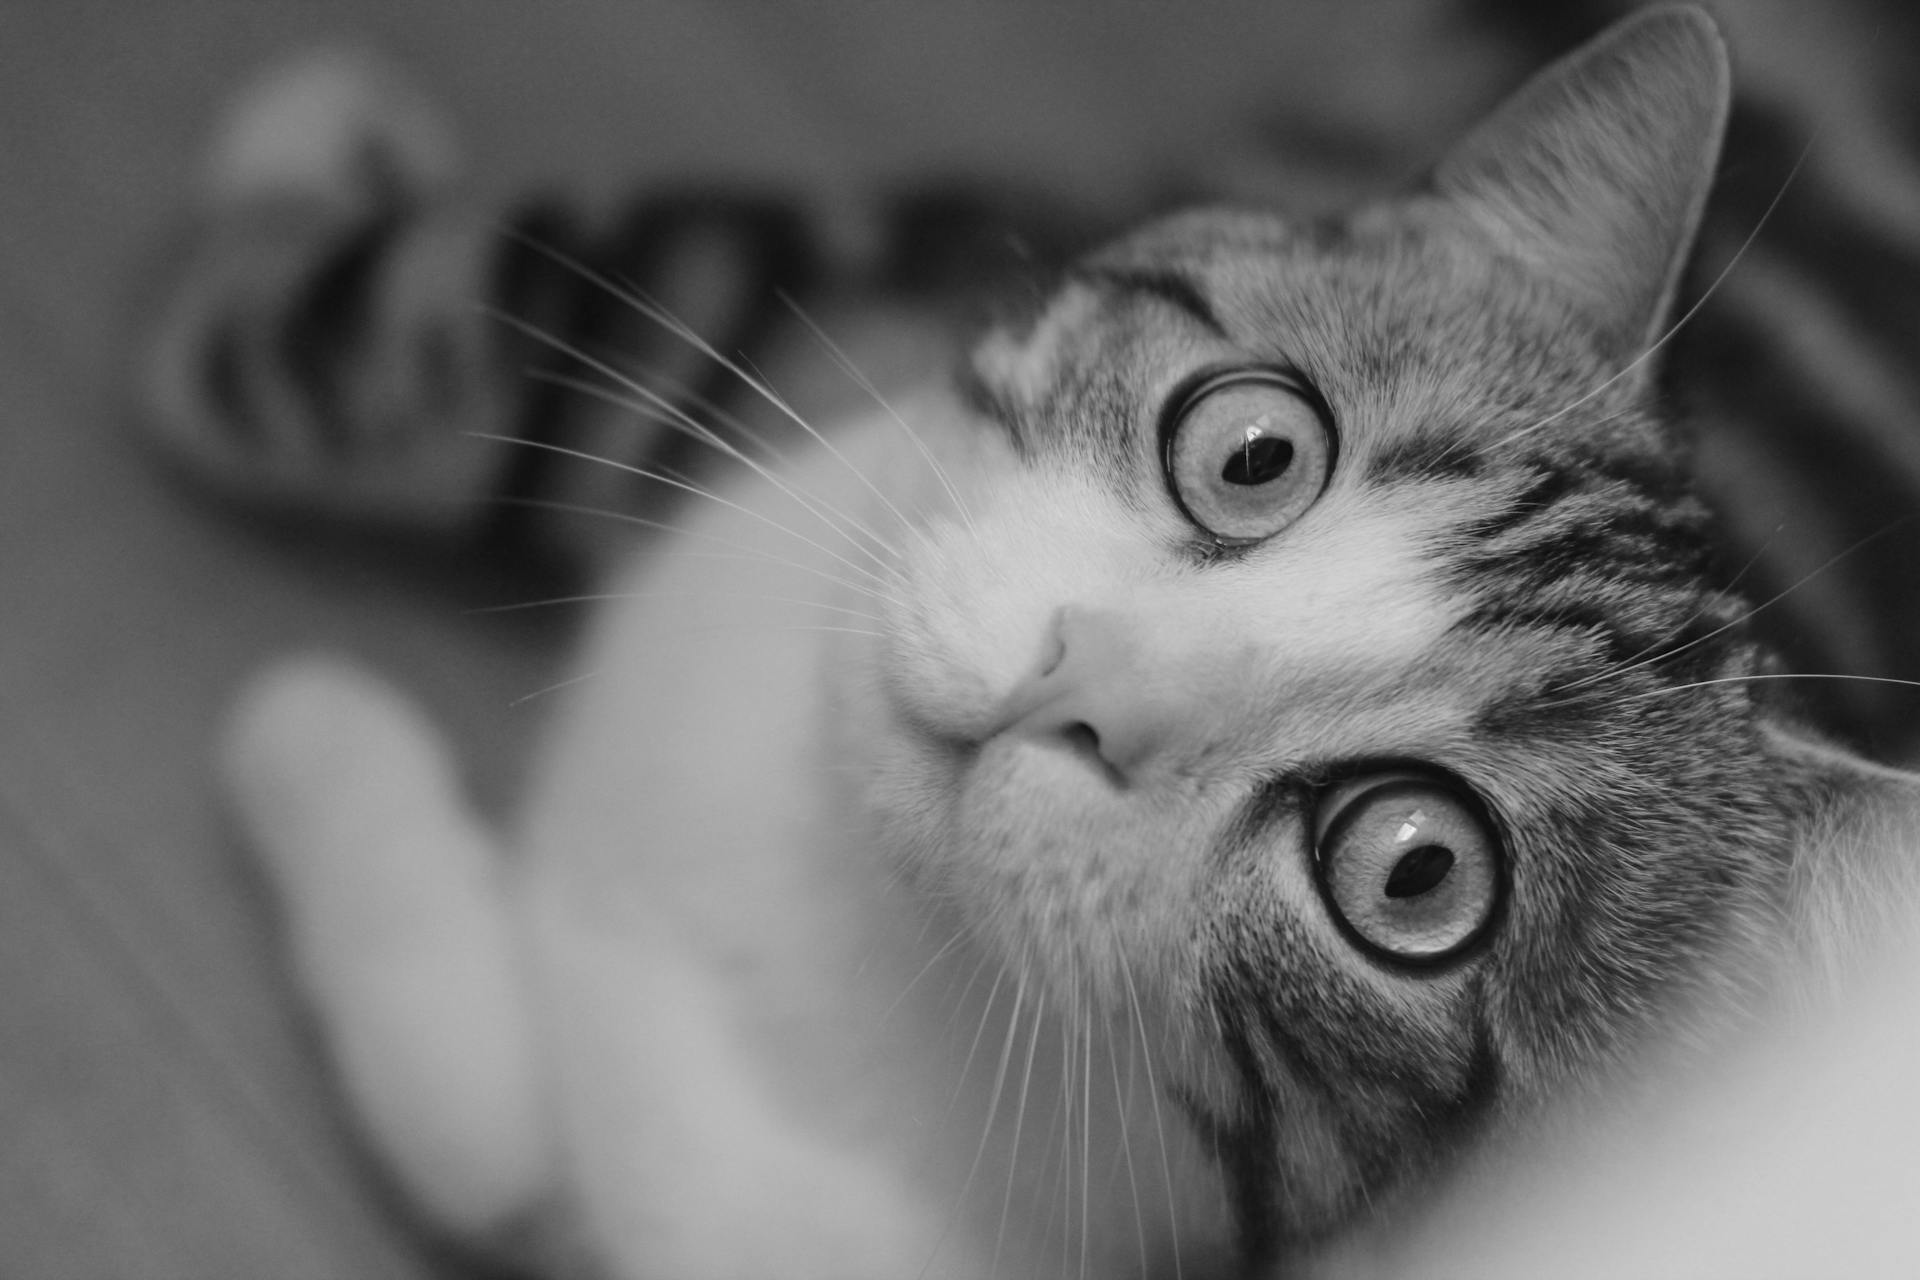 Staring Cat in Close-up View